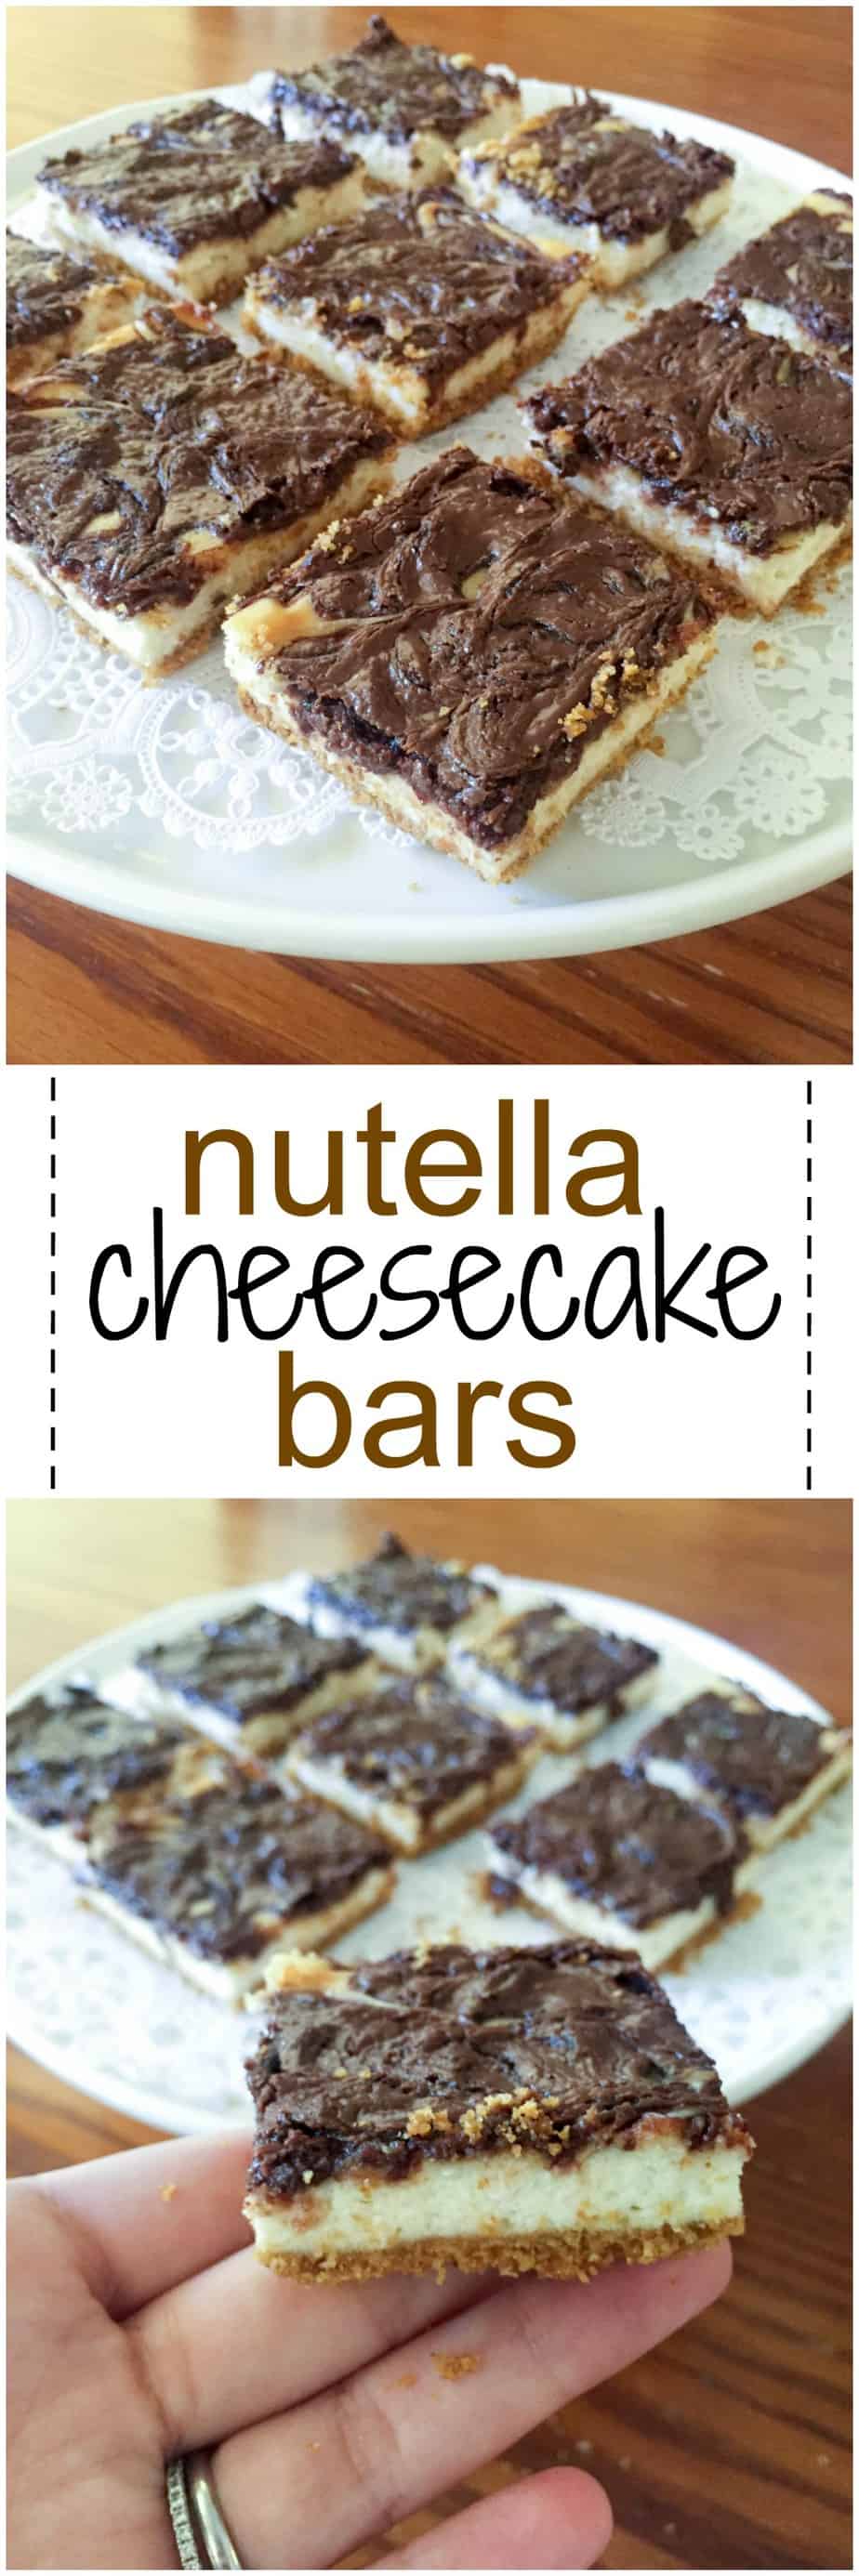 Nutella Cheesecake Bars are the perfect mix of chocolate with everyone's favorite dessert in one,easy to make (and eat!) dessert!